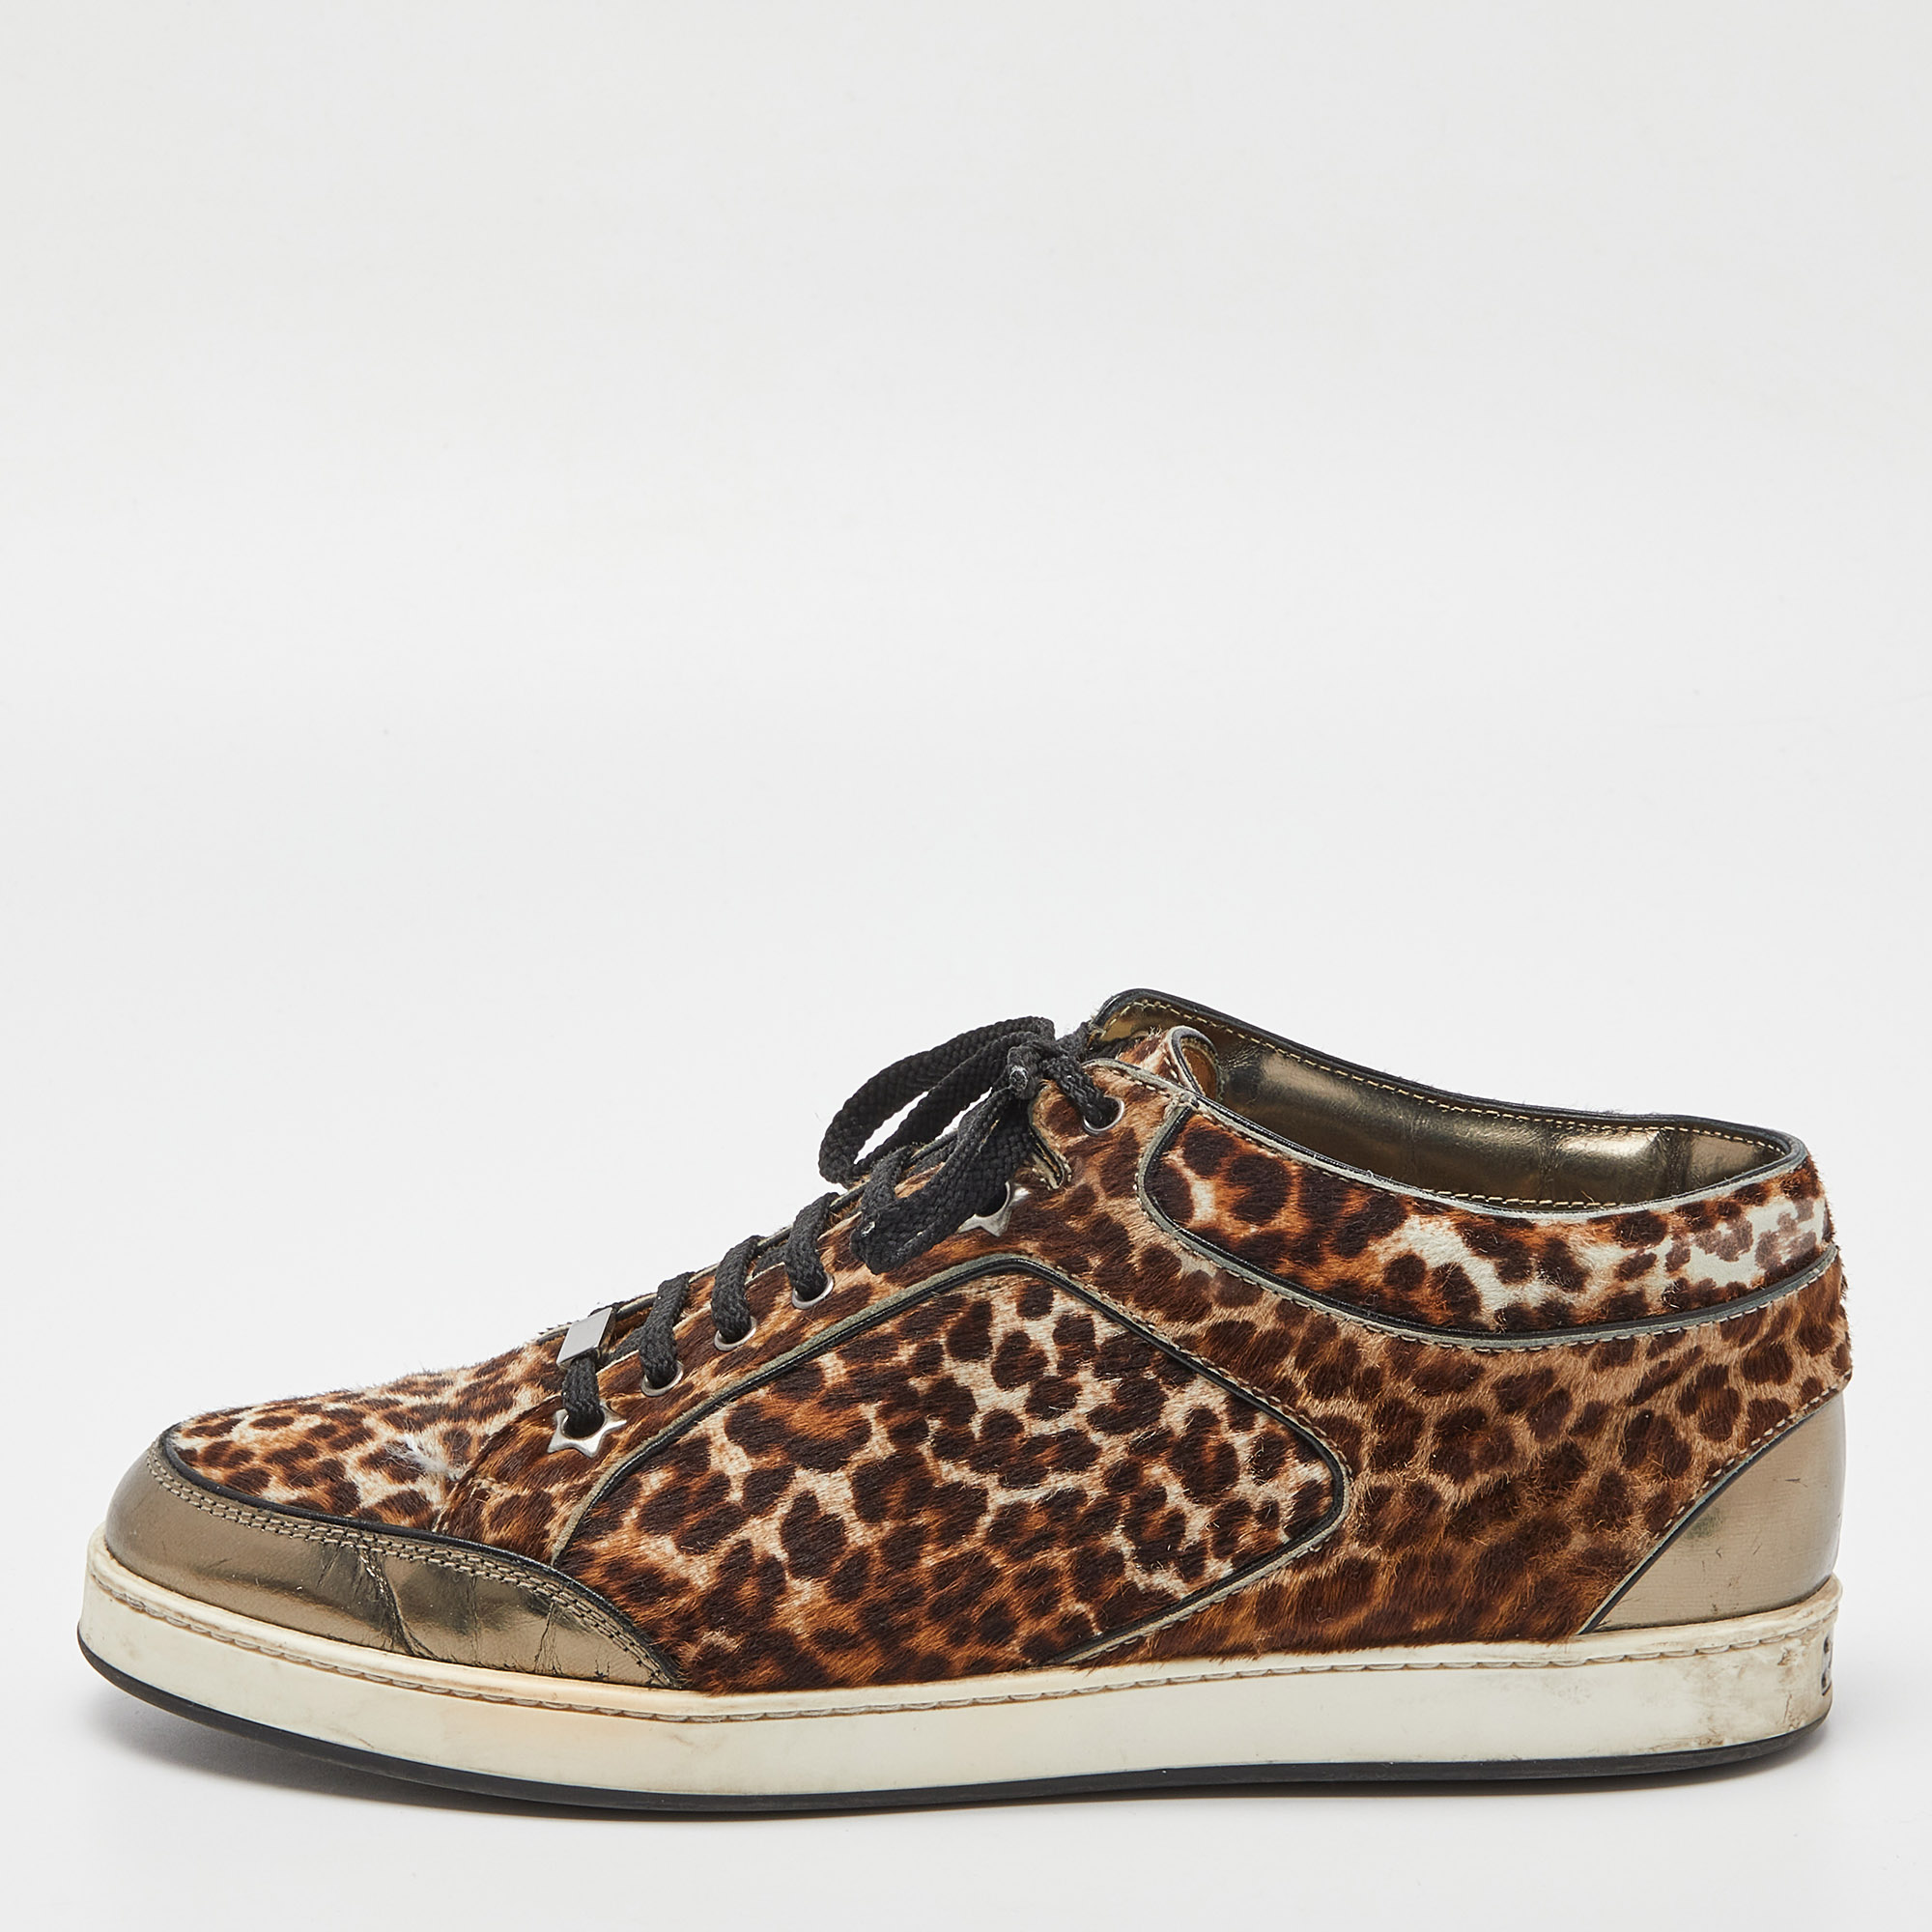 

Jimmy Choo Brown/Metallic Leopard Print Calfhair and Mirrored Leather Miami Low Top Sneakers Size